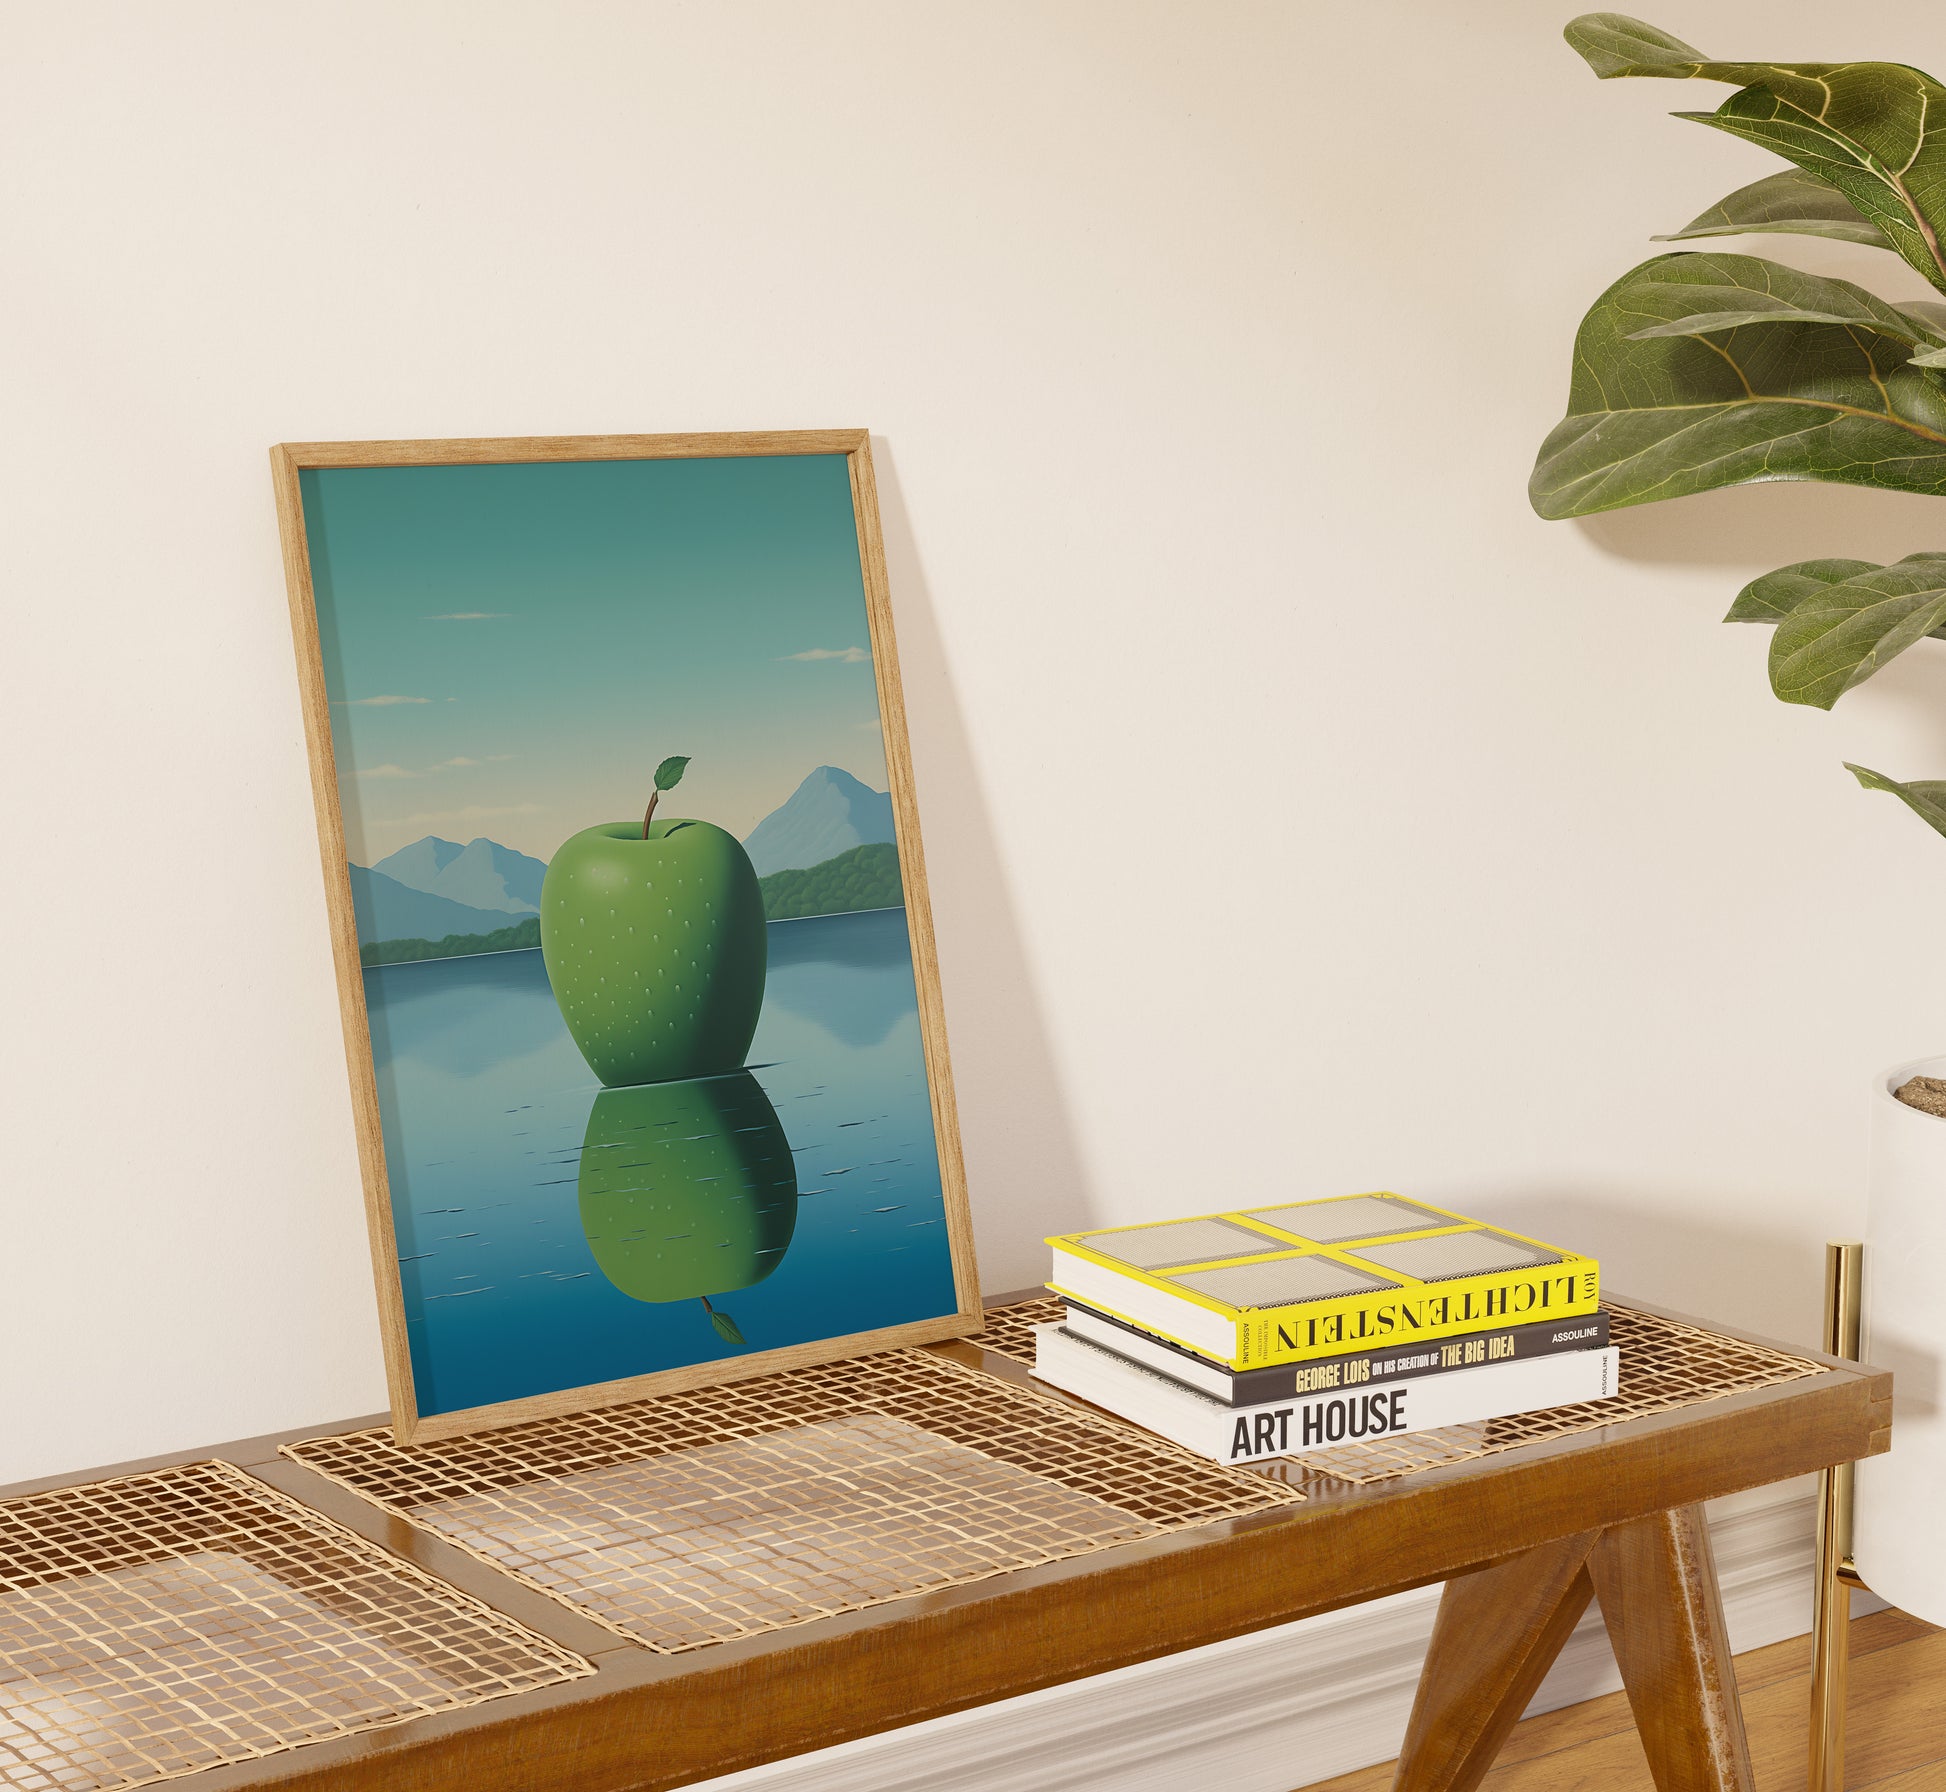 A framed artwork of an apple reflected in water on a shelf with books.